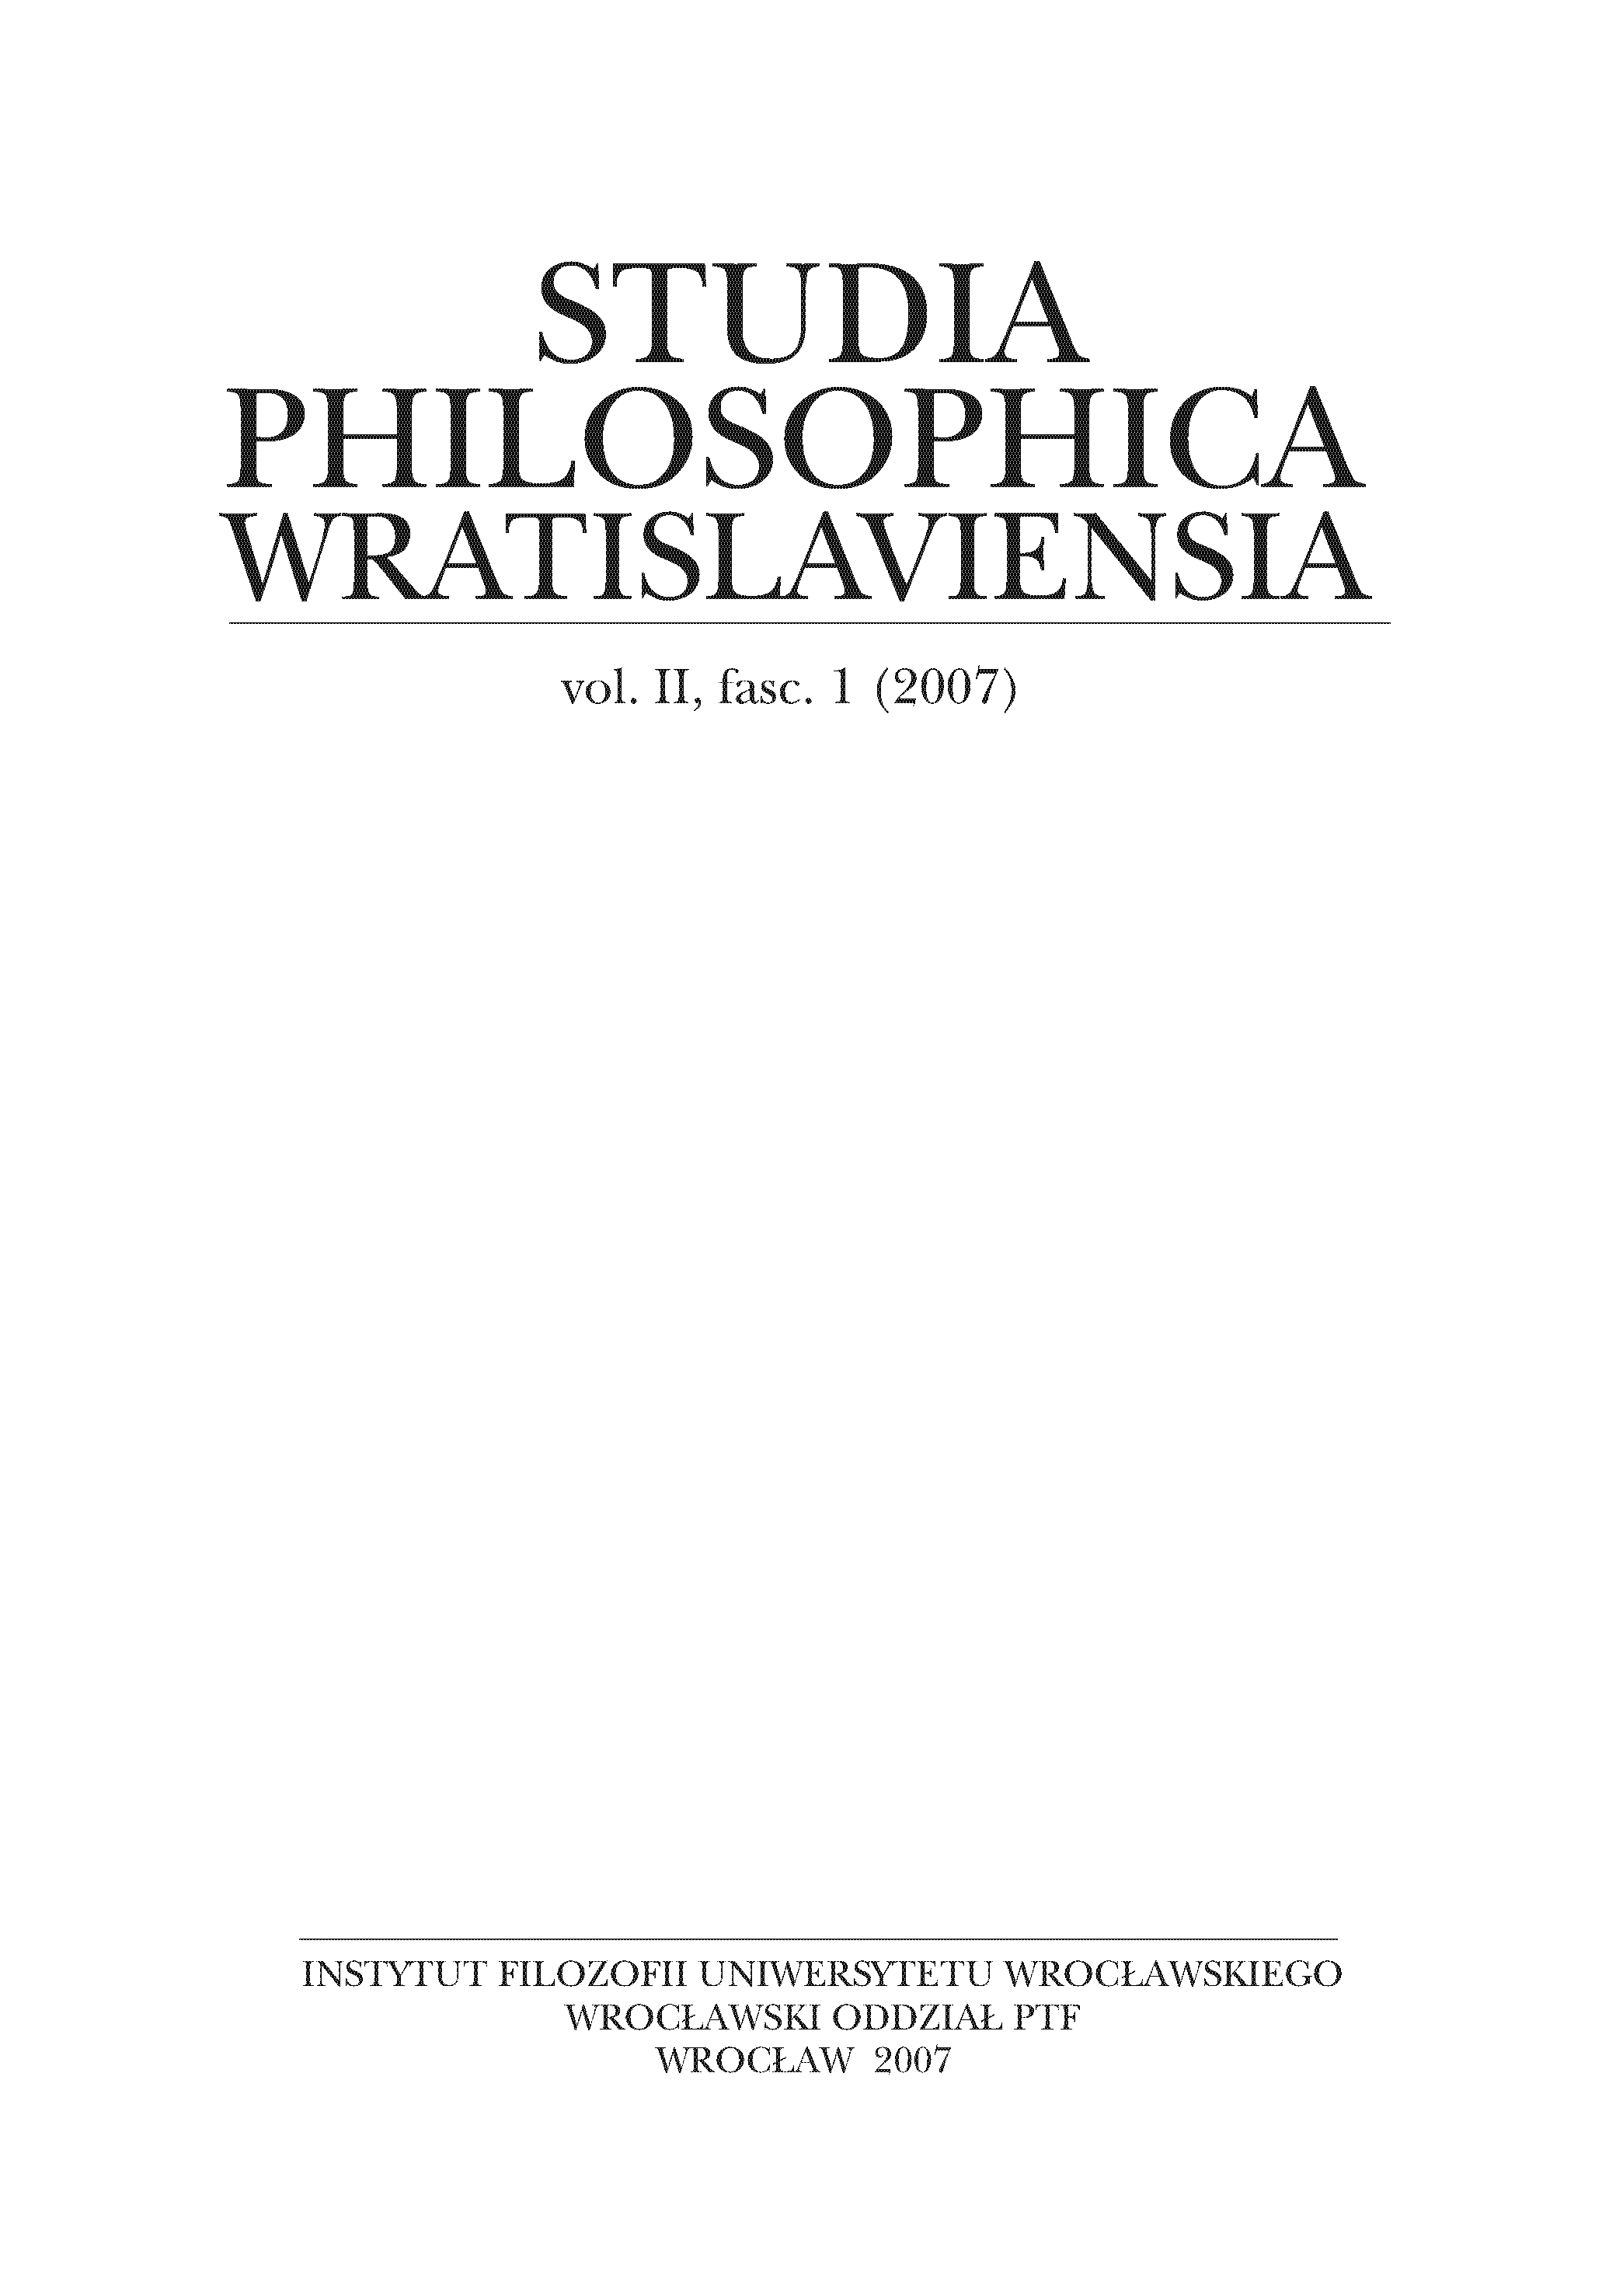 Philosophy with the key or key to philosophy? Cover Image